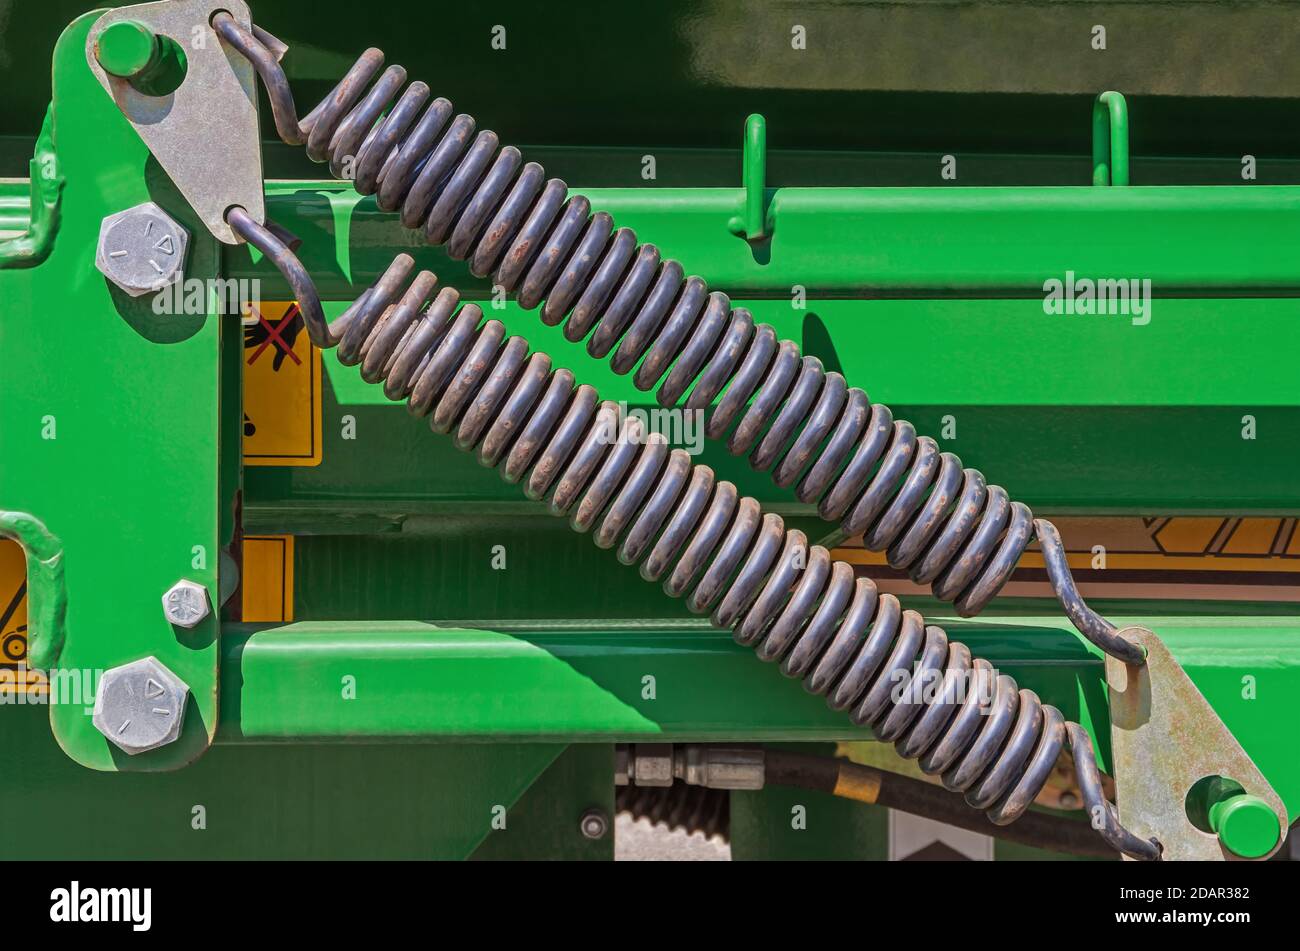 Spring damping system. Double spring shock absorber mounted on mechanical device Stock Photo